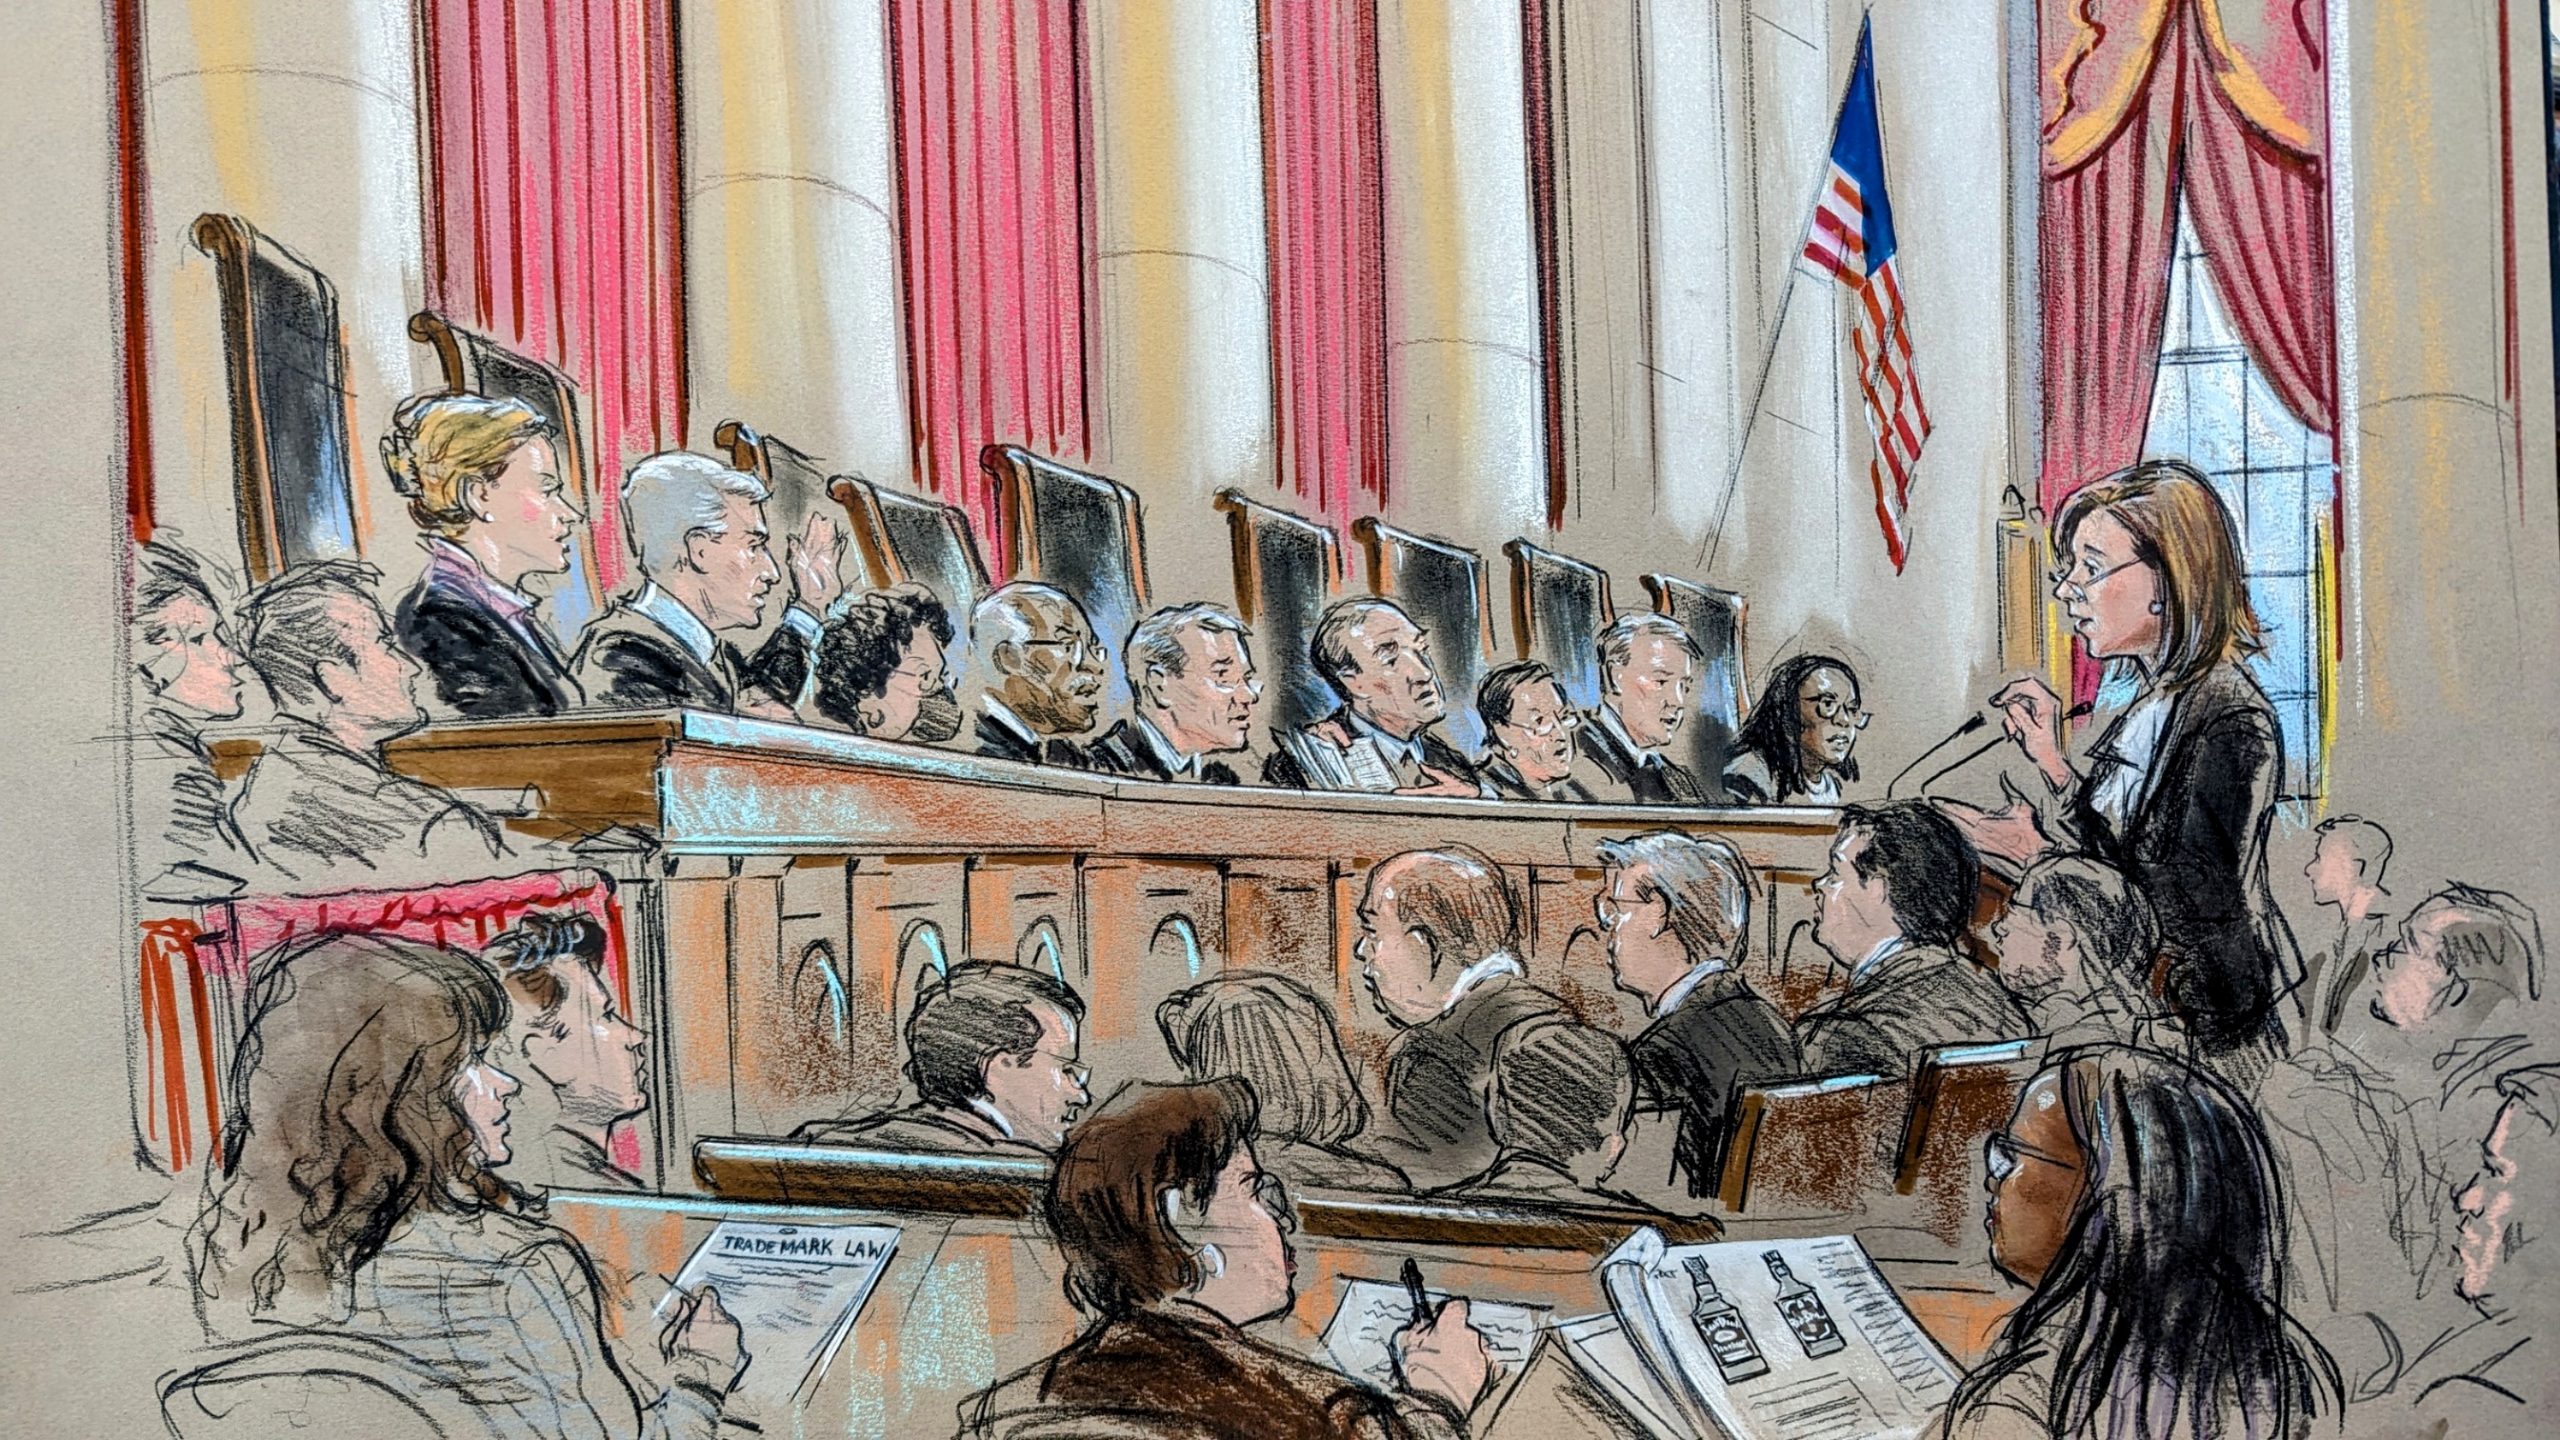 Sketch of the courtroom as a woman argues before the podium. Audience and several reporters can be seen, in addition to the full podium. Justice Gorsuch raises his hand while Justice Alito holds up and gestures to some documents.